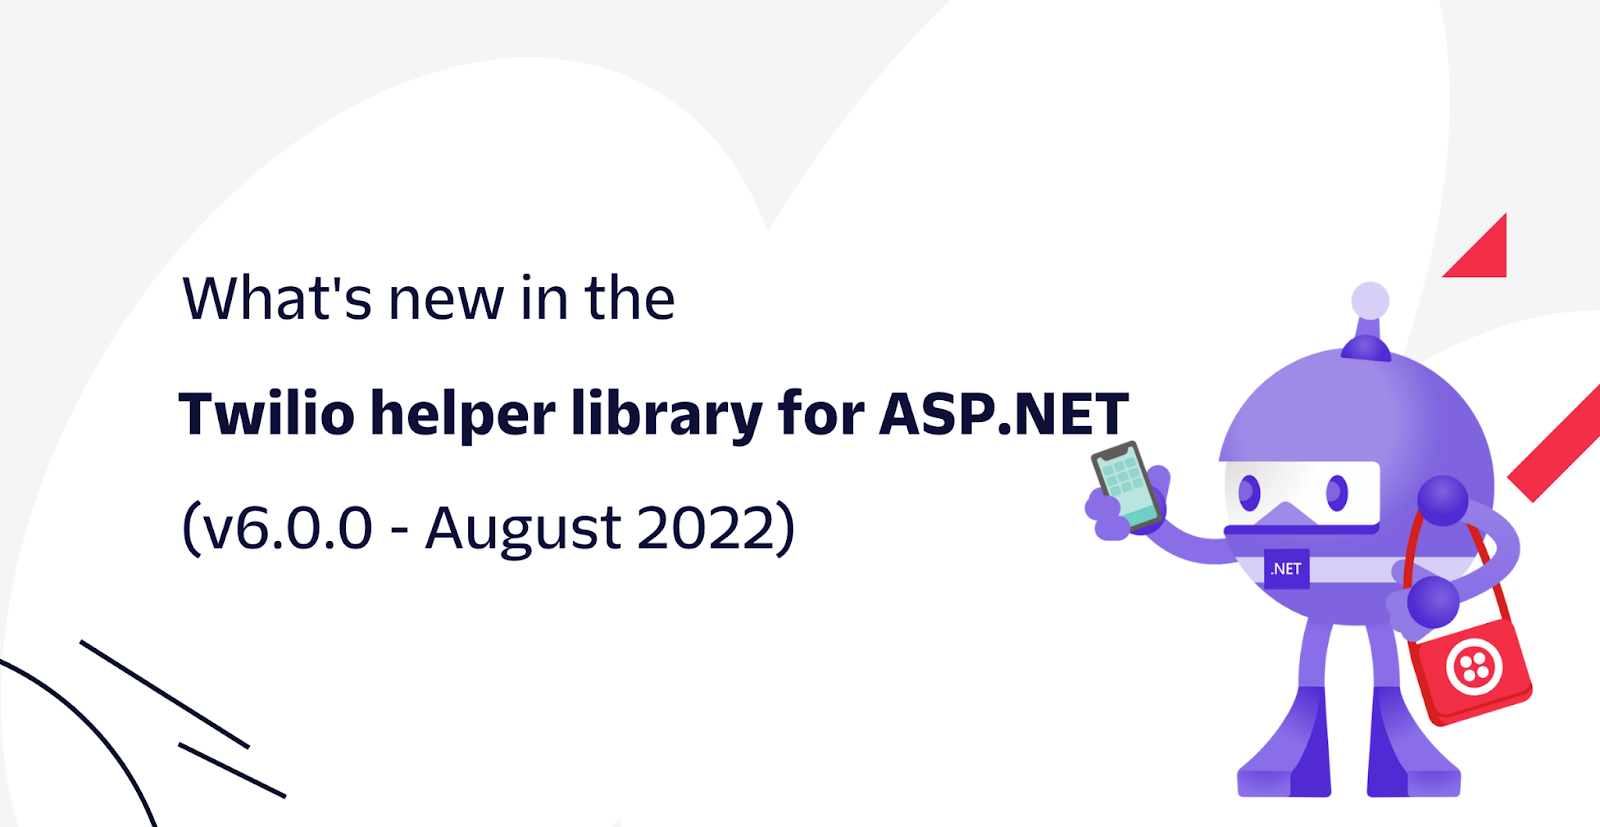 What's new in the Twilio helper library for ASP.NET (v6.0.0 - August 2022)